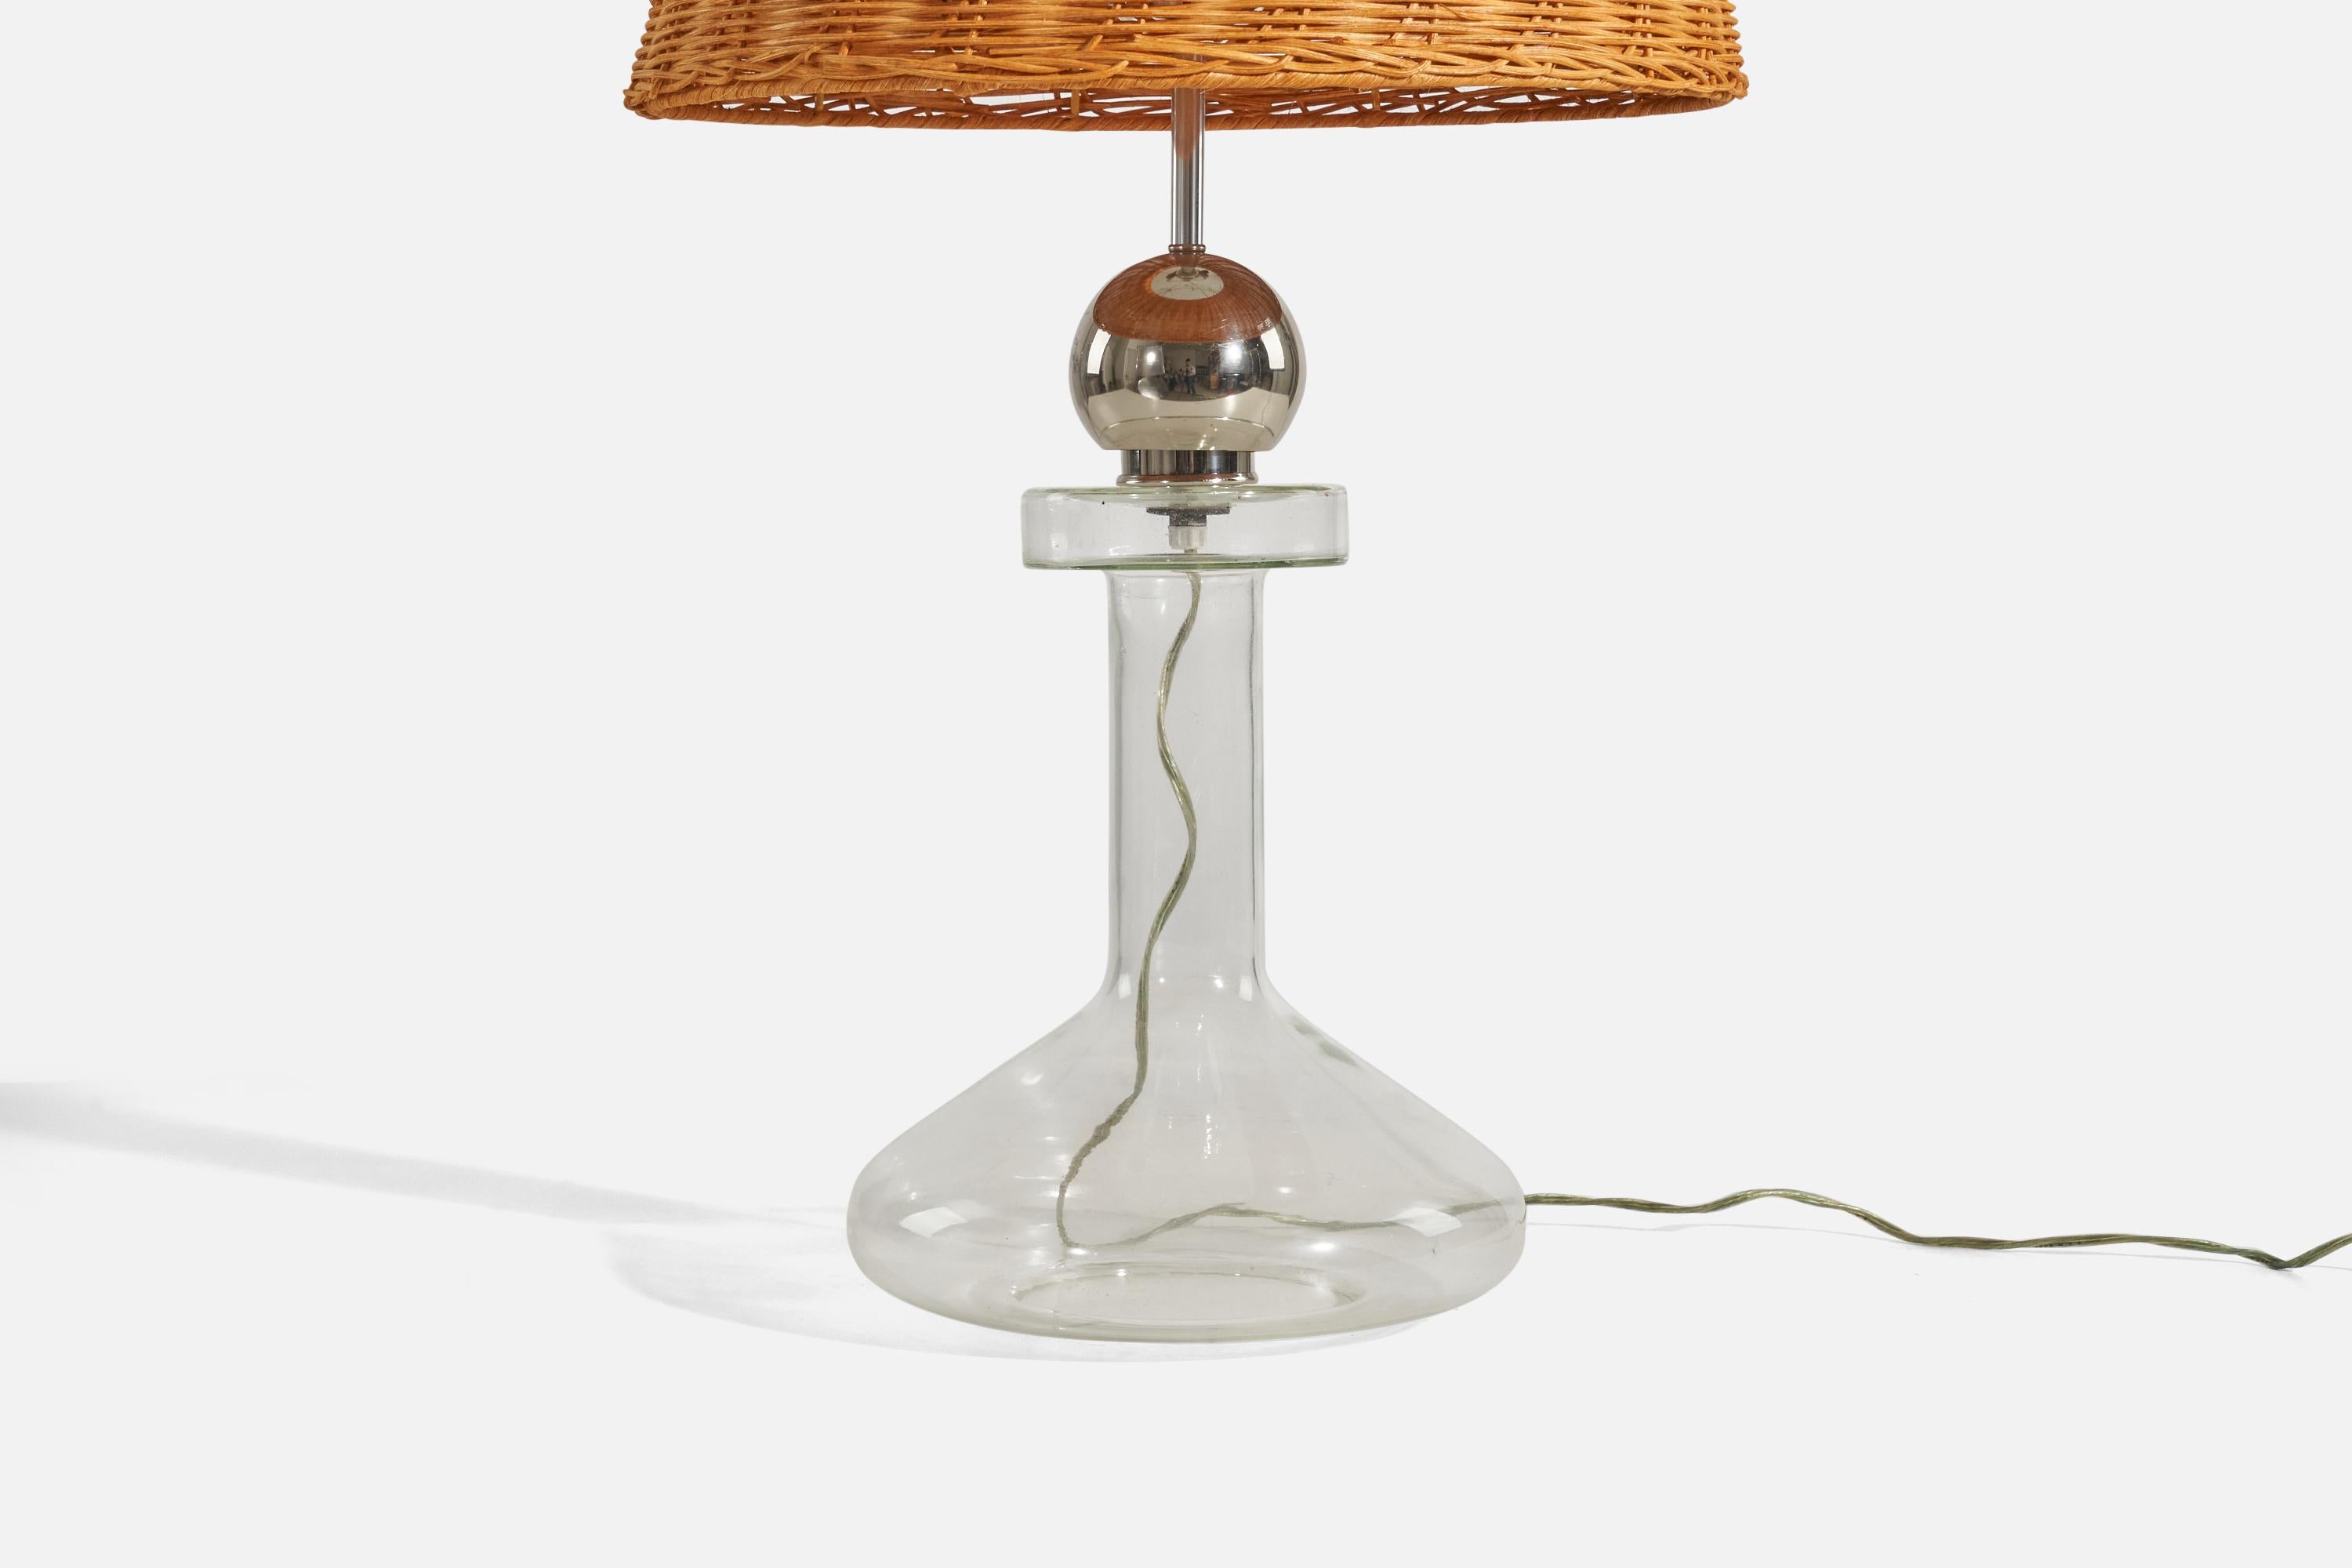 A chrome metal, glass and rattan table lamp designed and produced by Laurel Lamp Co., 1970s. 

Sold with Lampshade(s)
Dimensions of Lamp (inches) : 21.12 x 10.25 x 10.25 (Height x Width x Depth)
Dimensions of Shade (inches) : 13.75 x 16.5 x 11.5